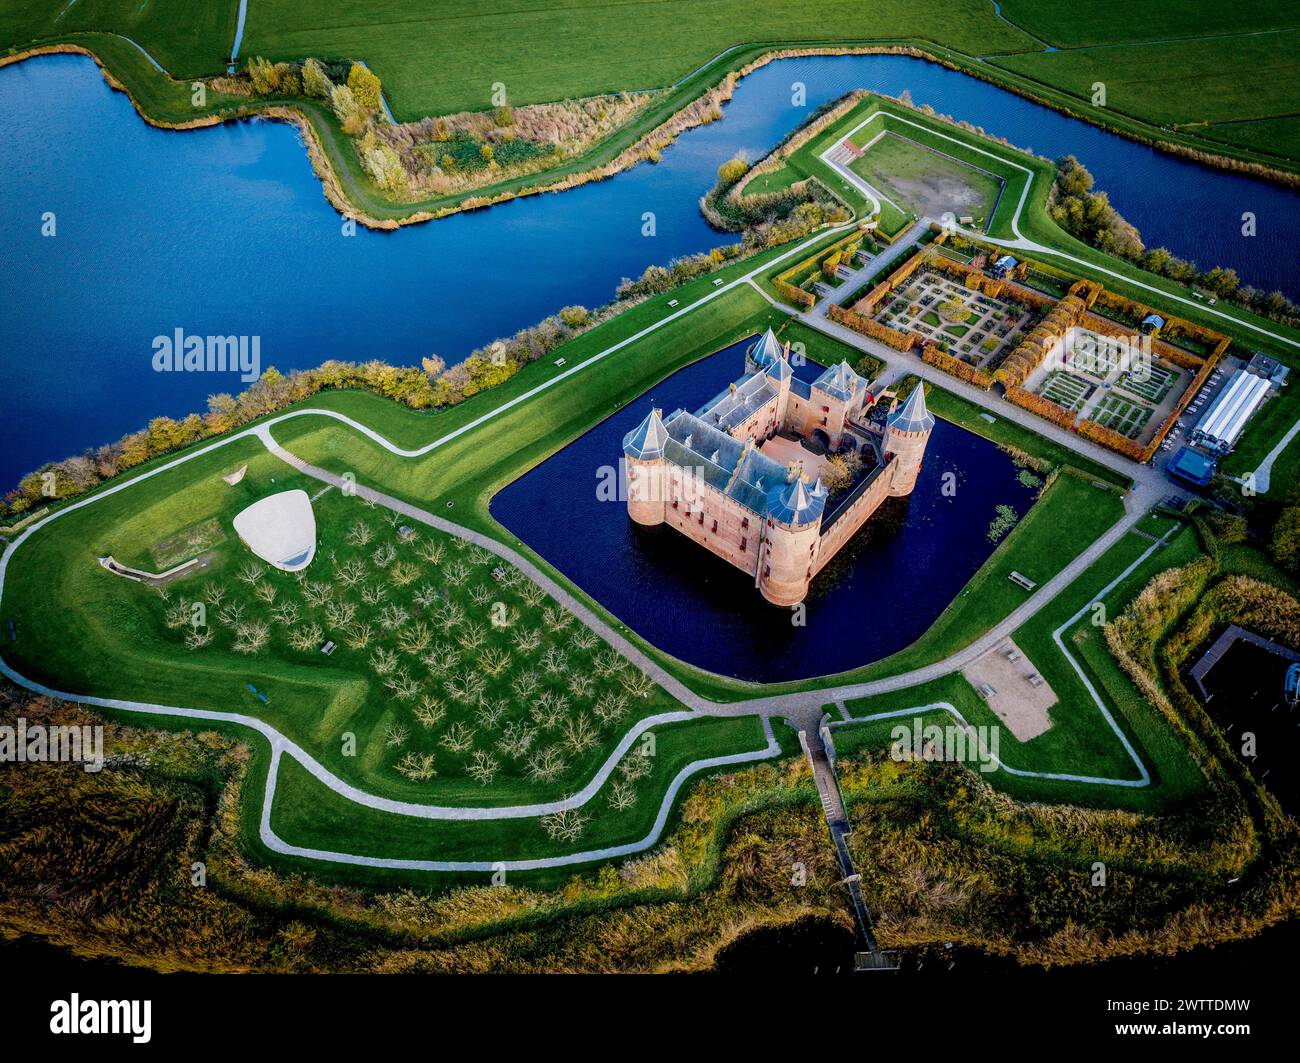 Aerial view of a castle surrounded by moats and gardens. Stock Photo